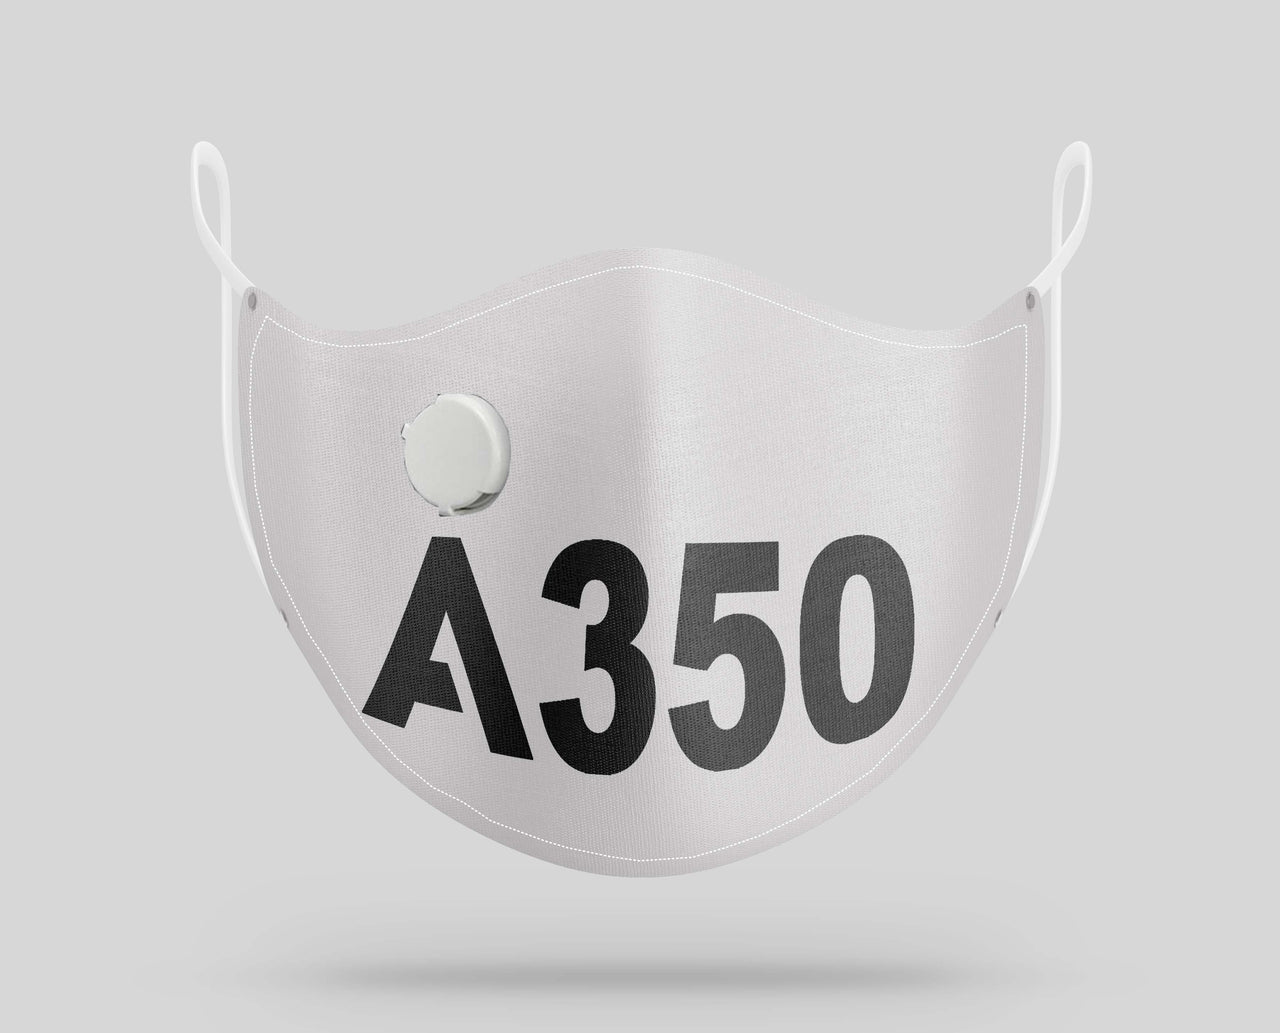 Airbus A350 Text Designed Face Masks